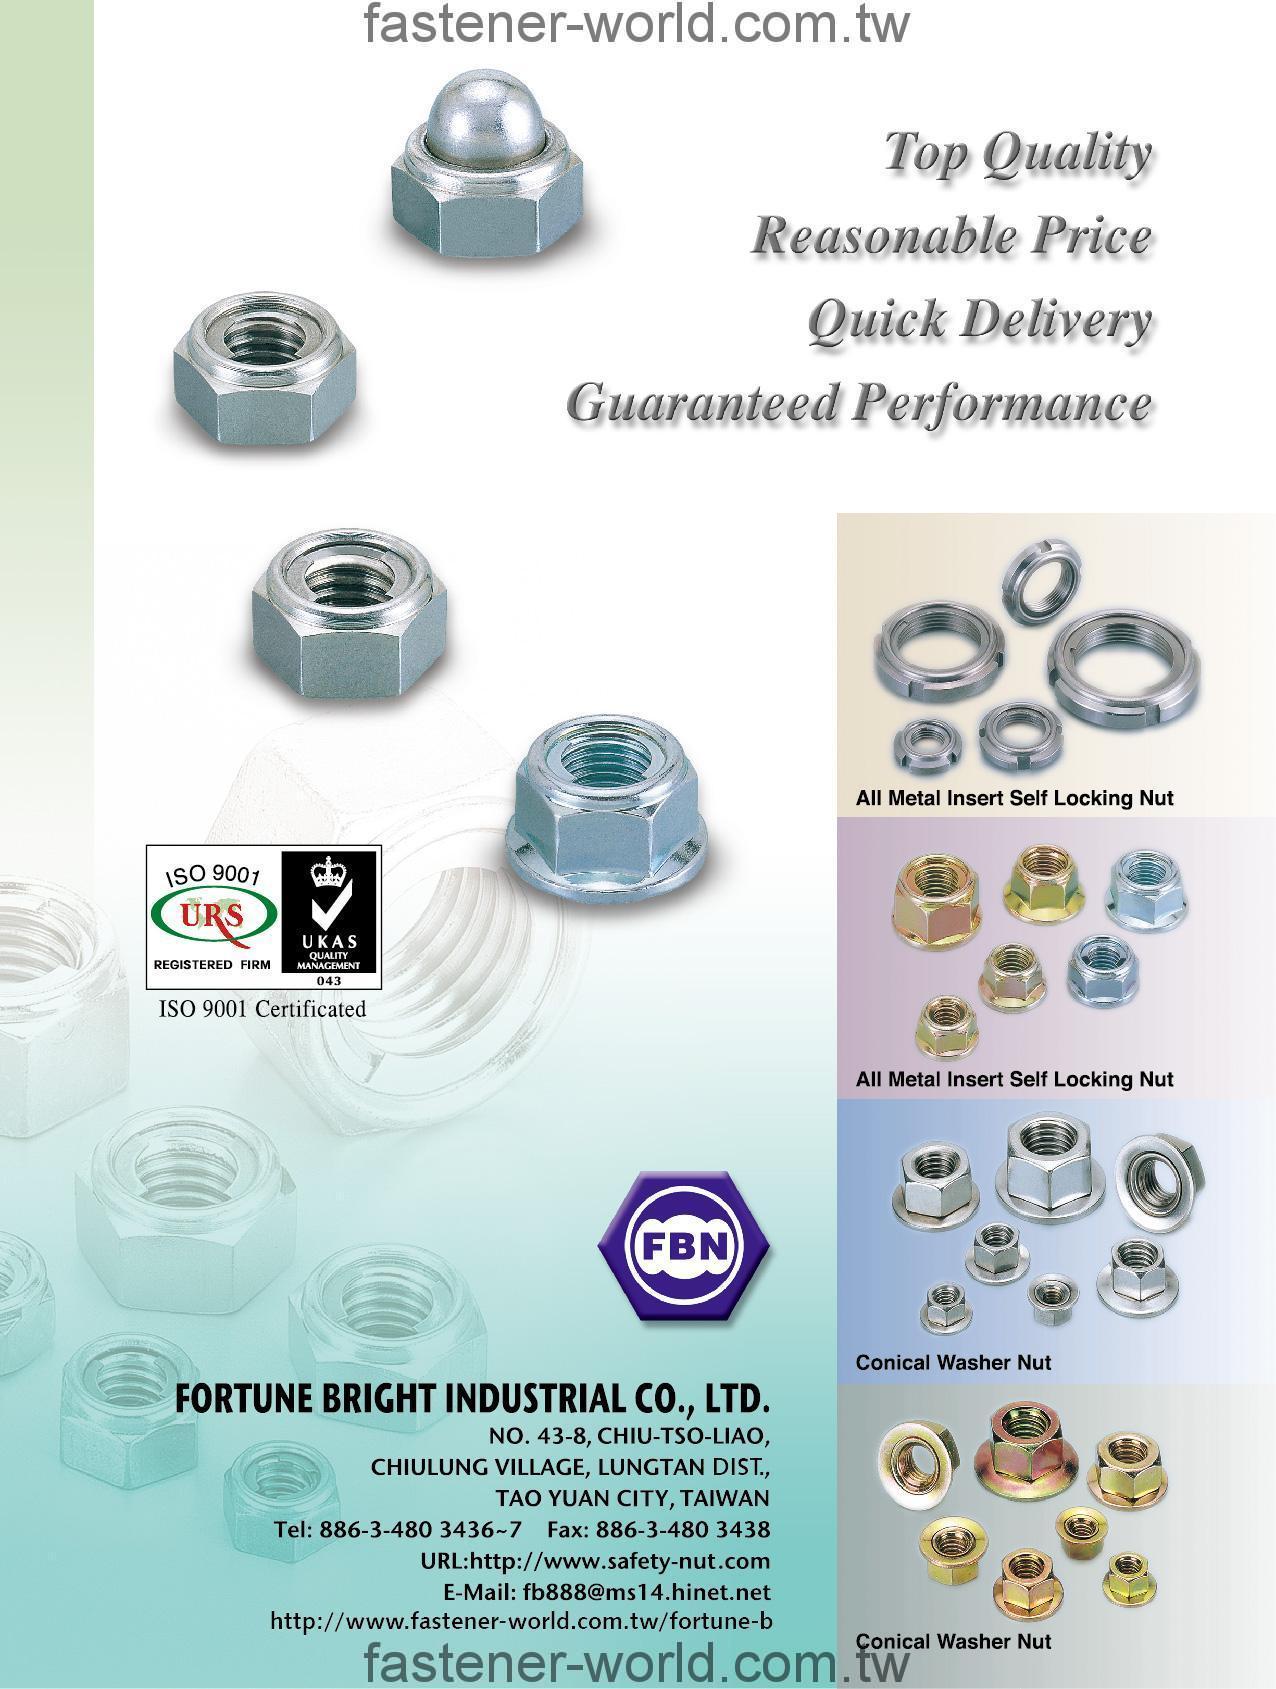 FORTUNE BRIGHT INDUSTRIAL CO., LTD.  Online Catalogues